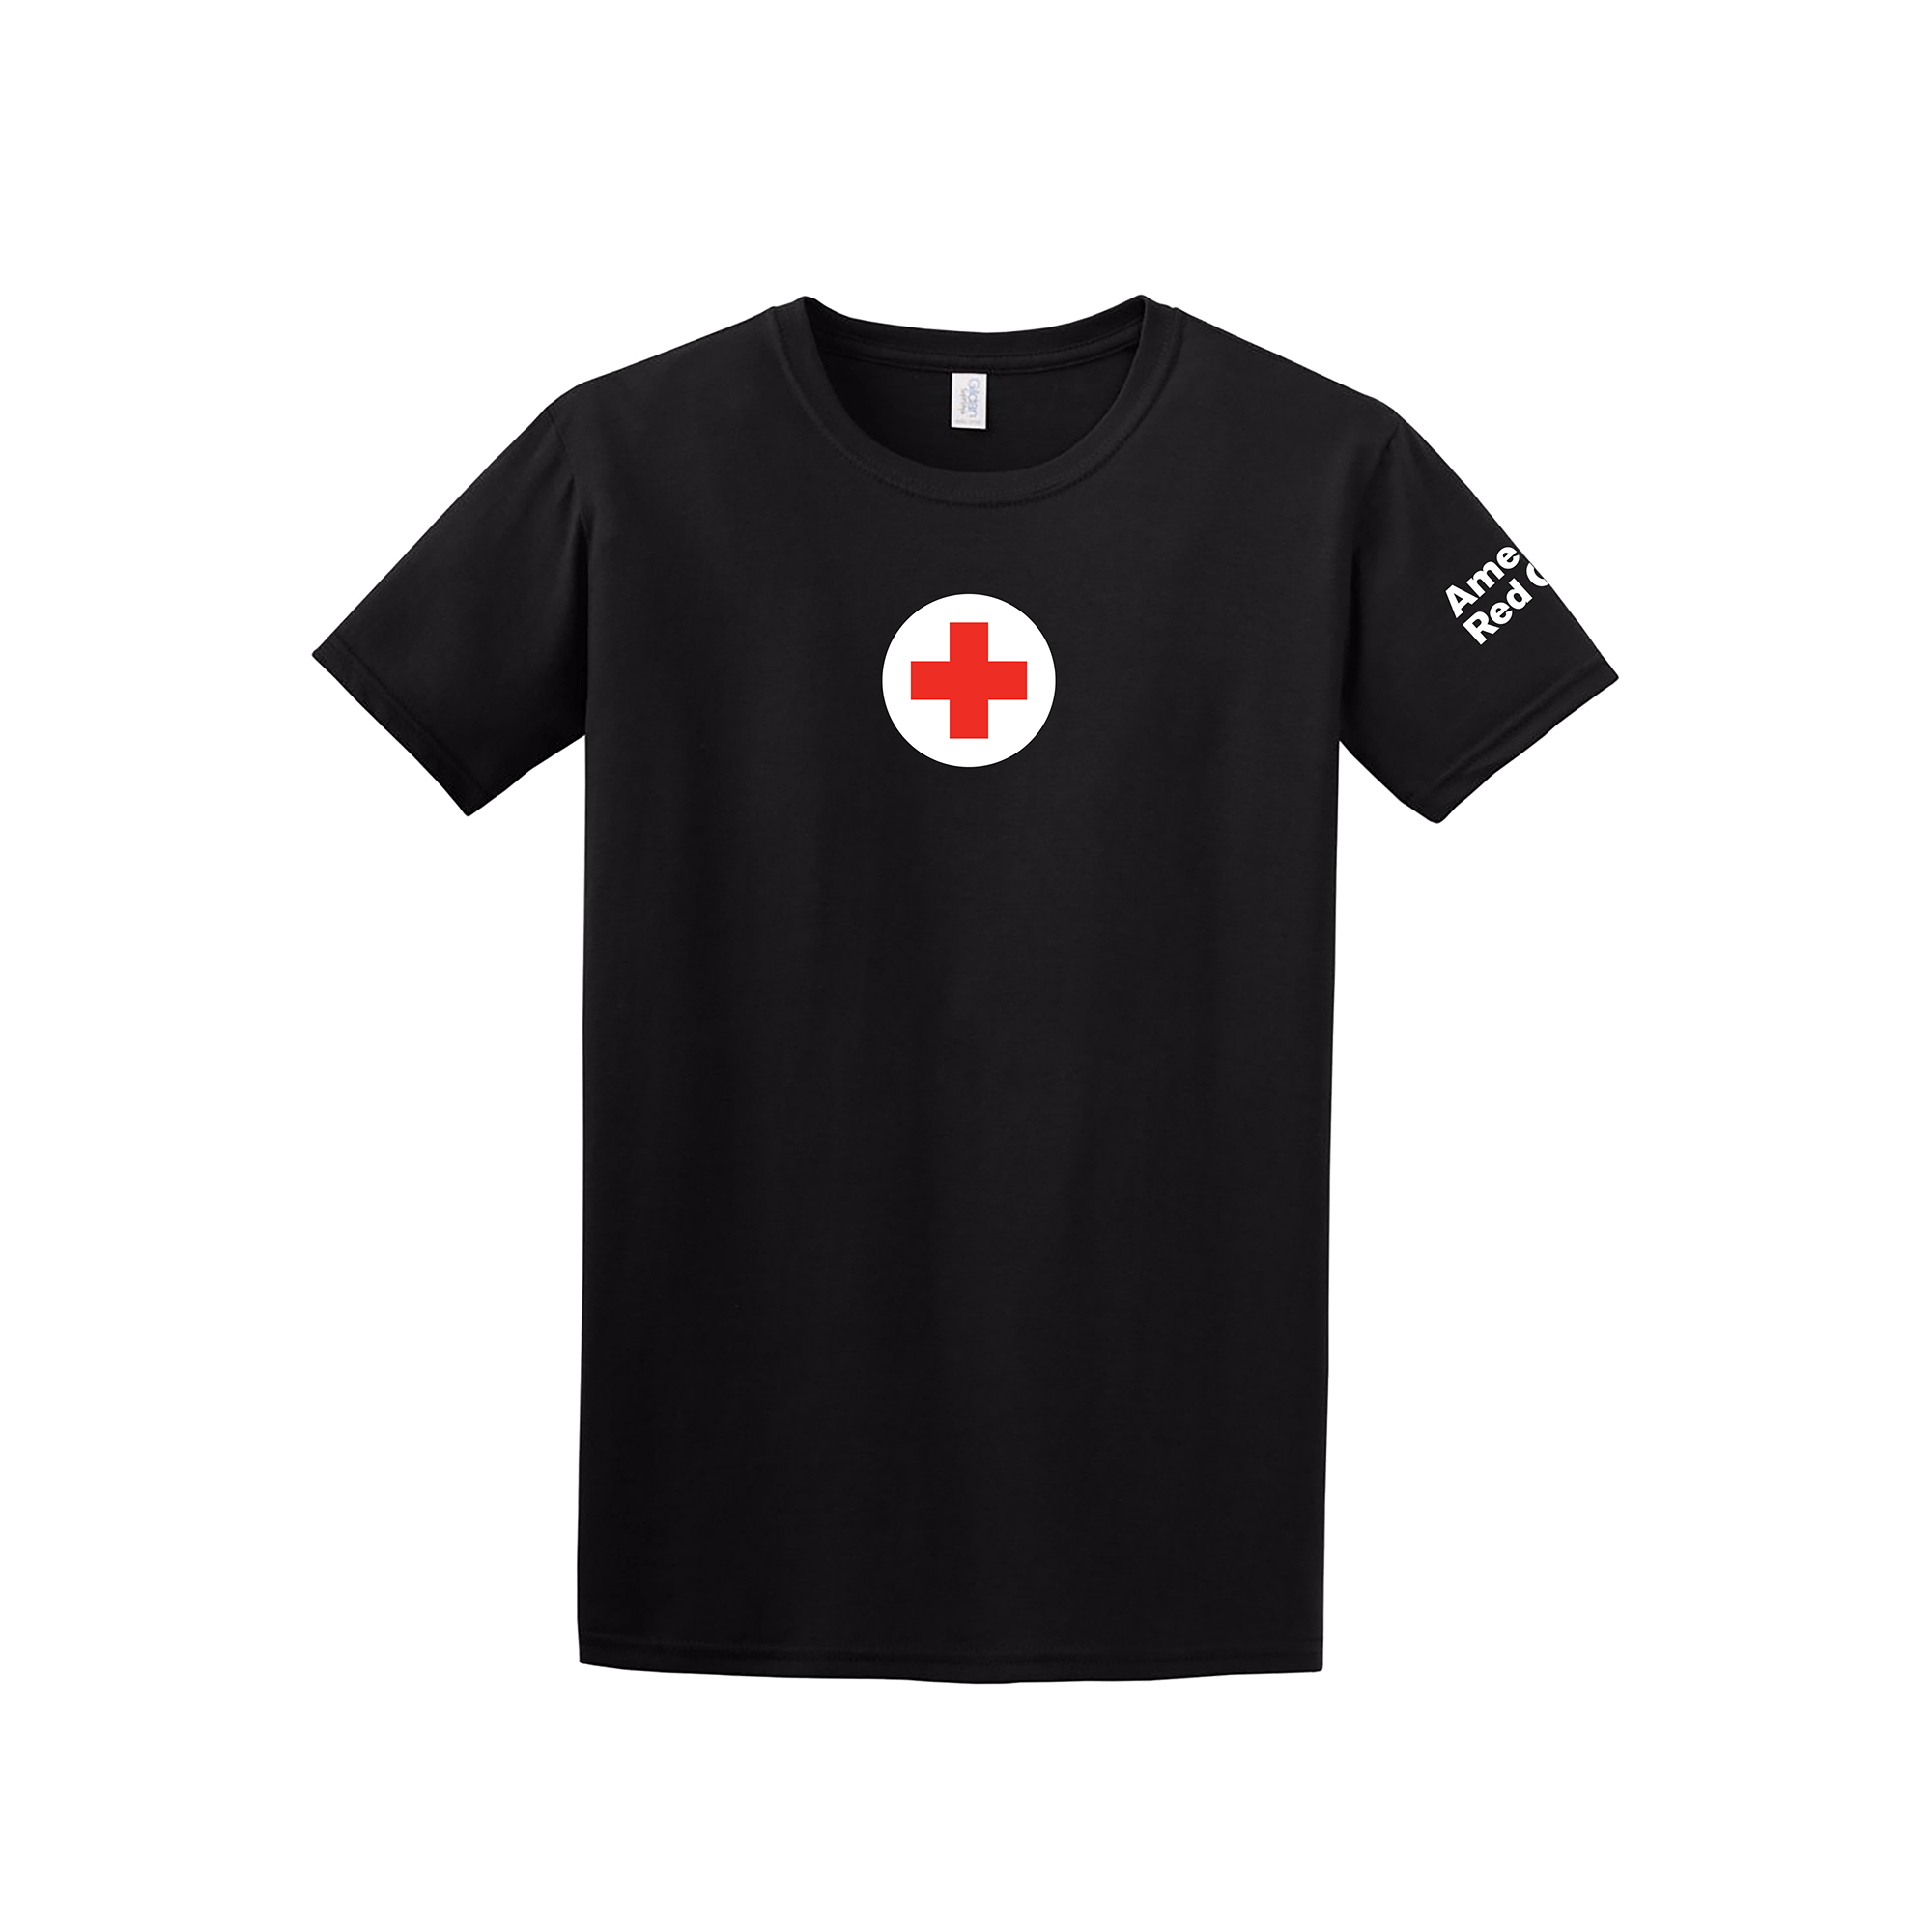 Classic American Red Cross Logo - Unisex 100% Cotton T Shirt With ARC Logo. Red Cross Store